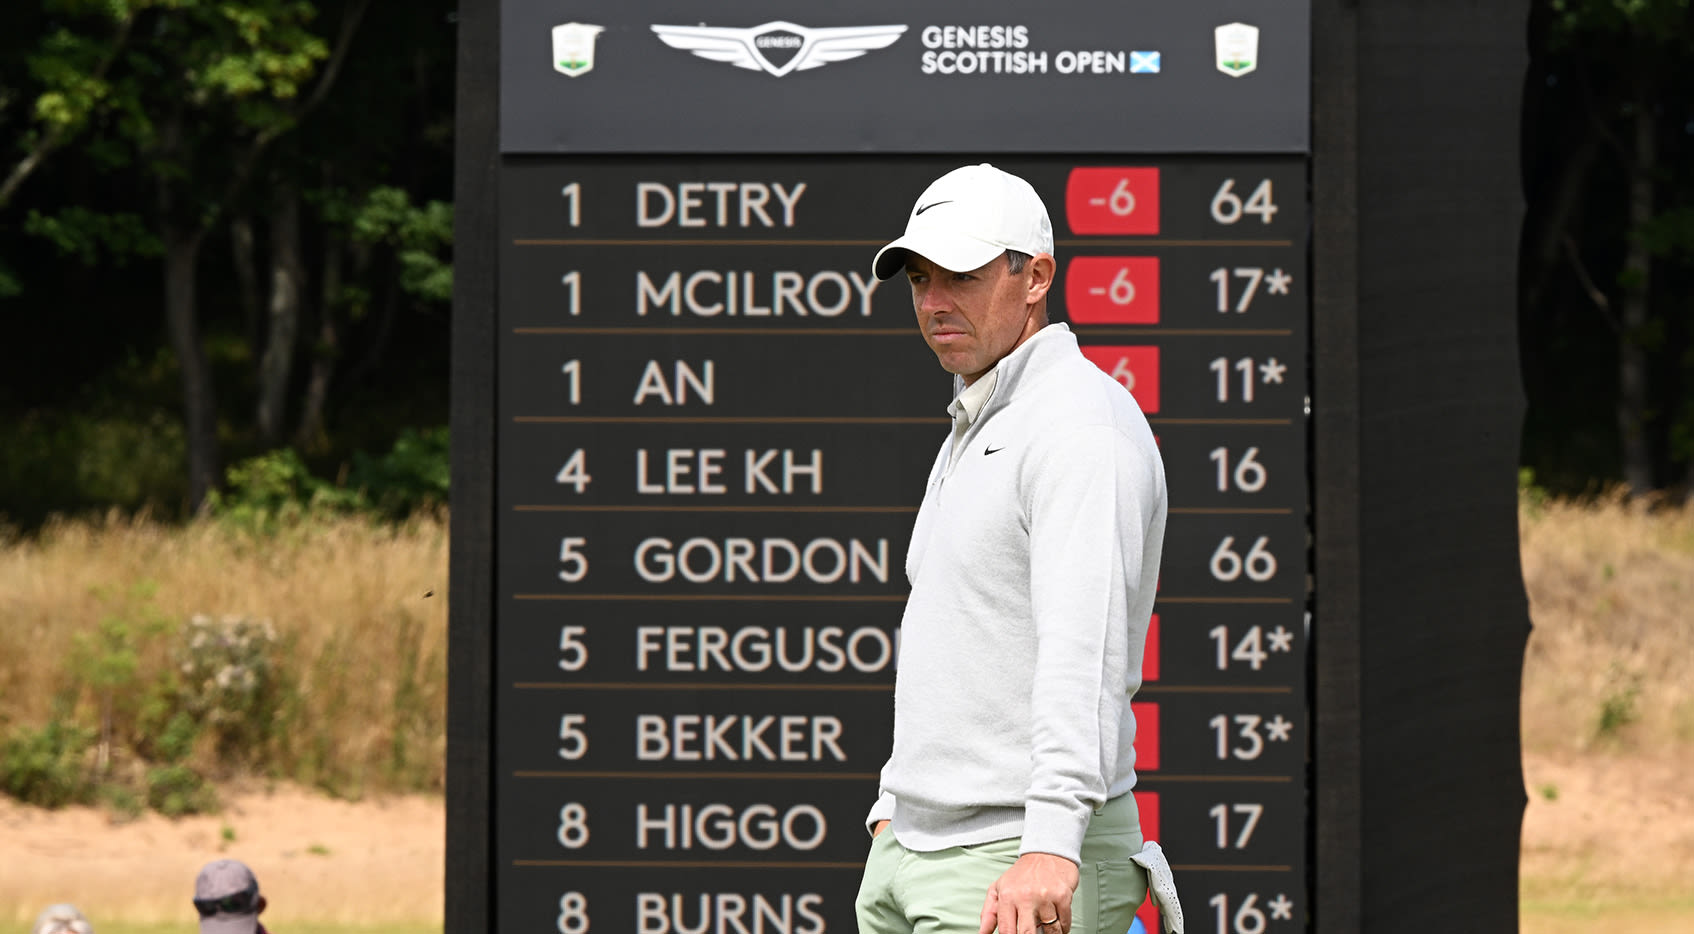 Rory McIlroy off to fast start at Genesis Scottish Open PGA TOUR